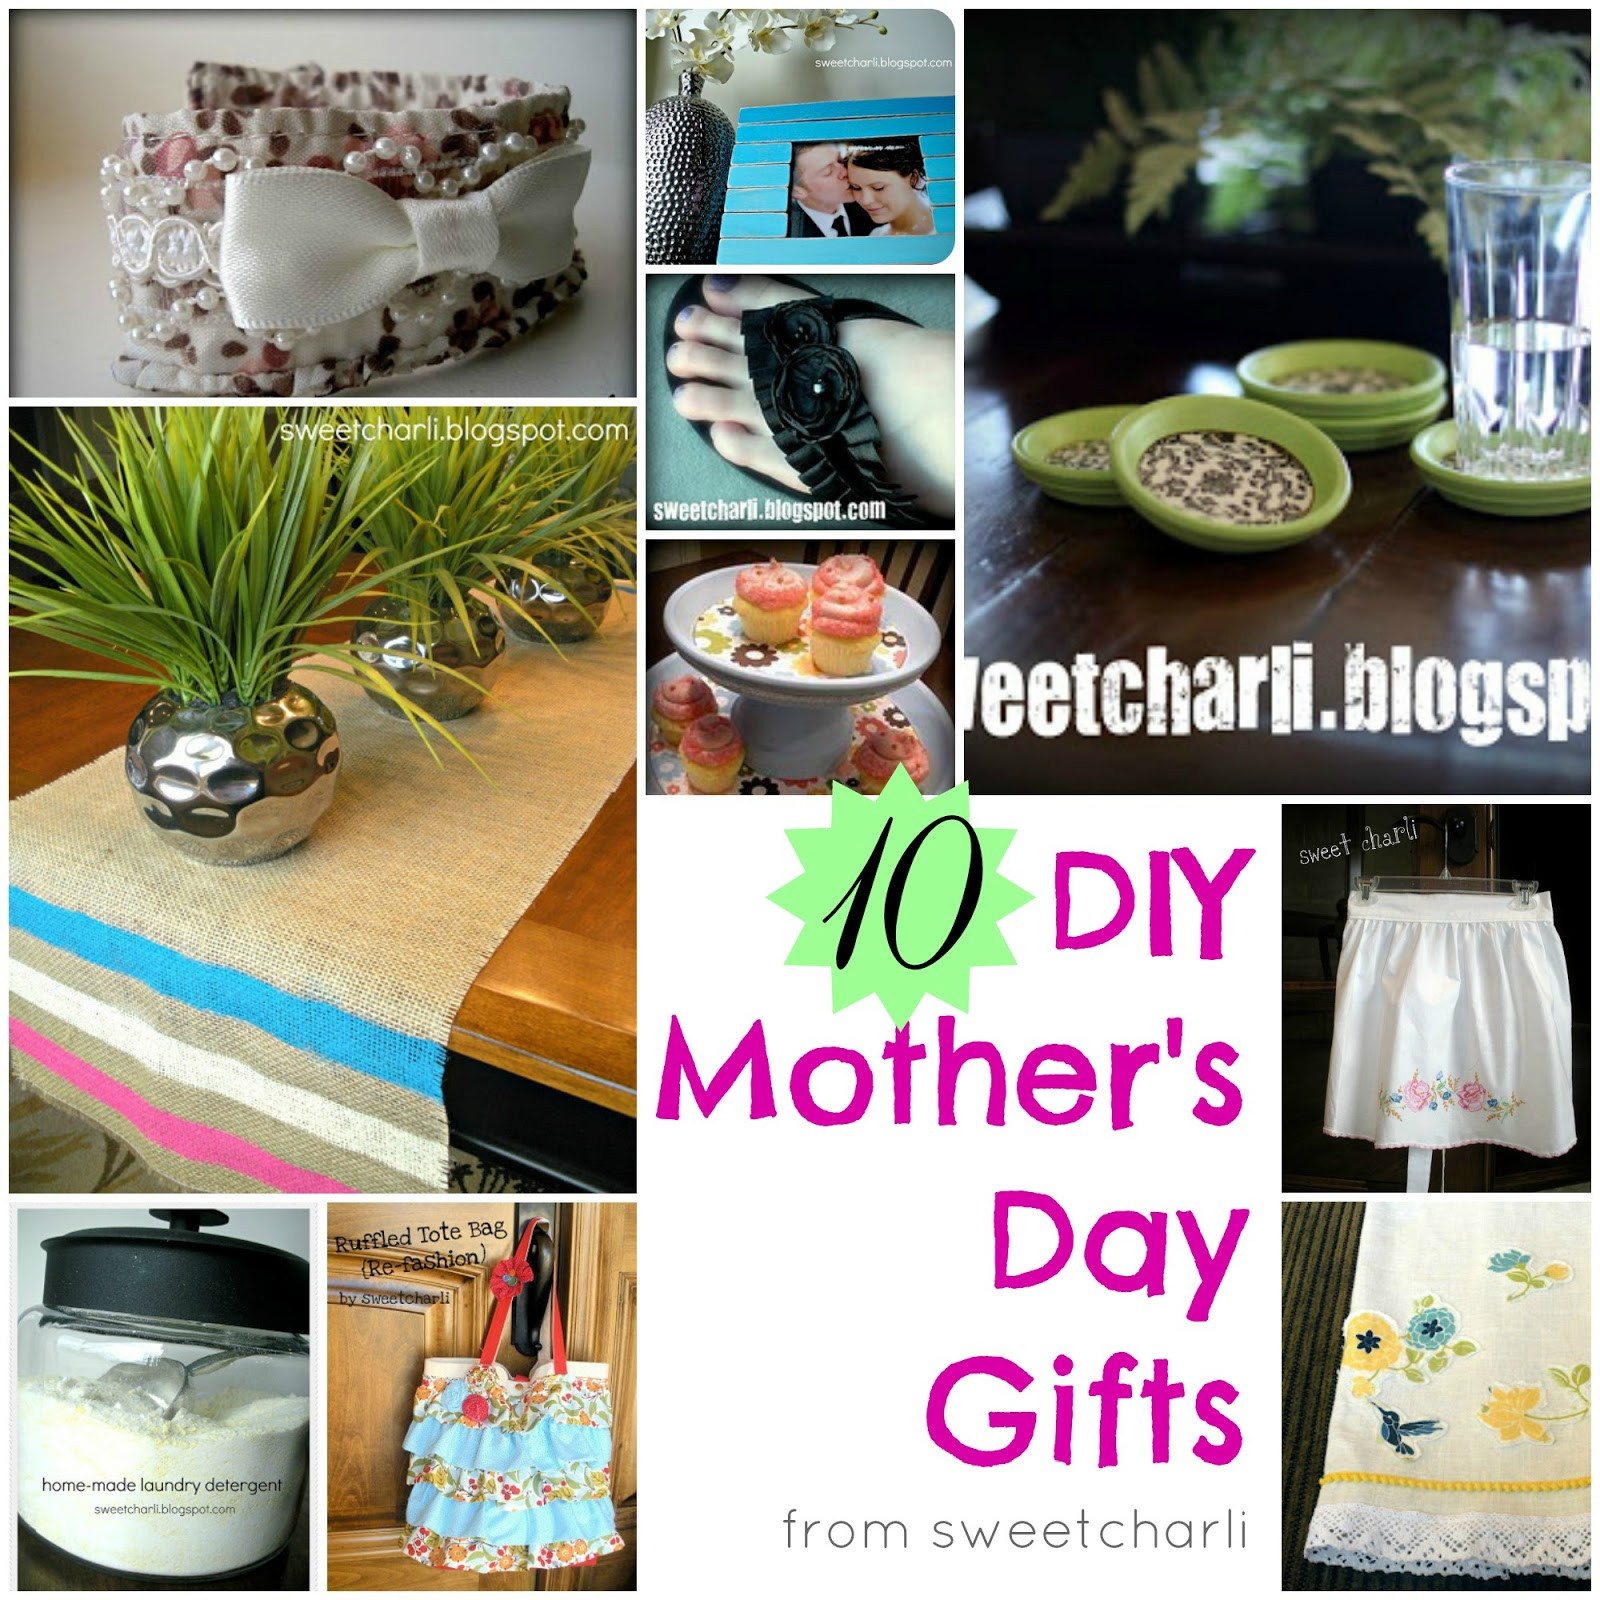 Easy DIY Mothers Day Gifts
 10 Easy DIY Mother s Day Gifts Sweet Charli